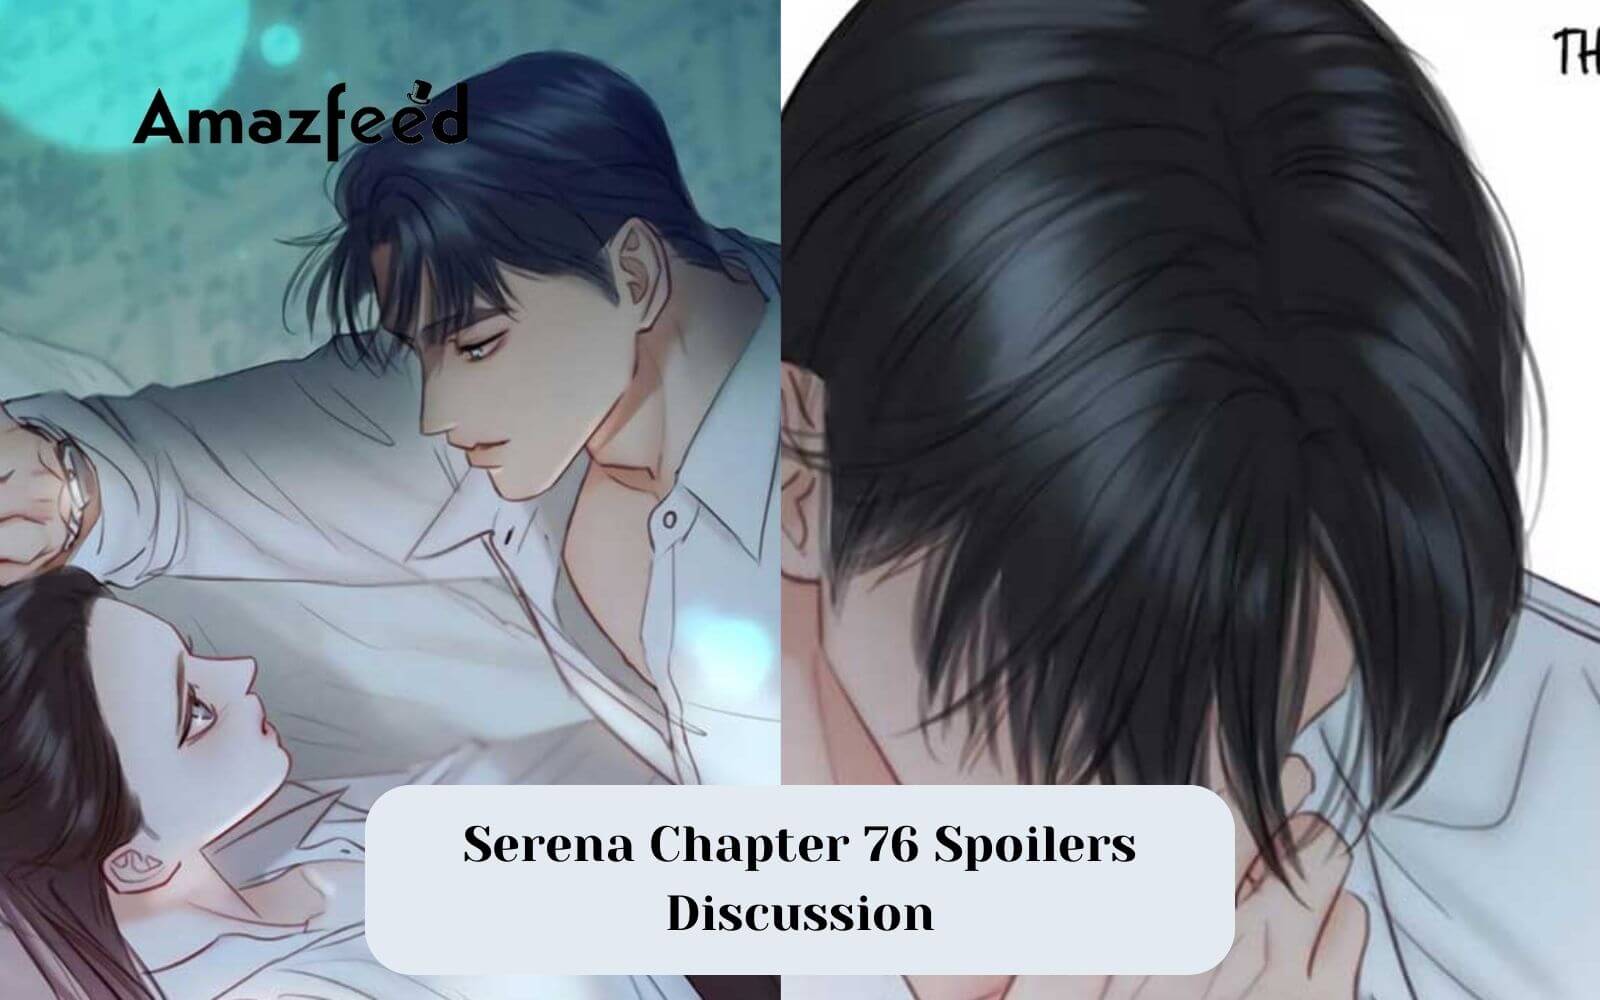 Serena Chapter 76 Spoilers Discussion